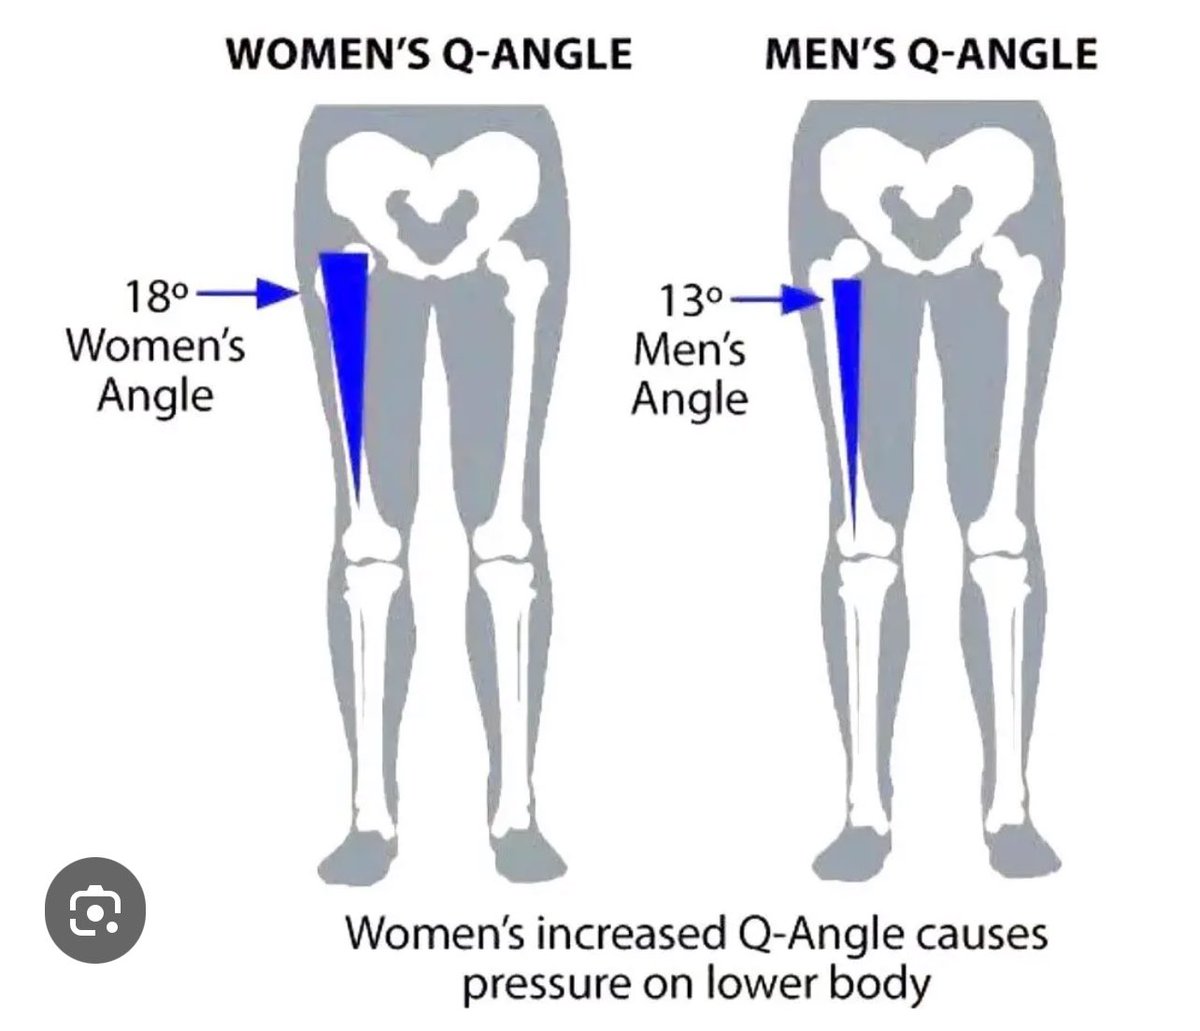 So besides never being able to reverse all advantage from male puberty the Q angle which effects cadence whilst running, cycling even kicking in swimming also increases knee injury by 3-6x in females. No males in female sport. It’s cheating & deliberate sex discrimination